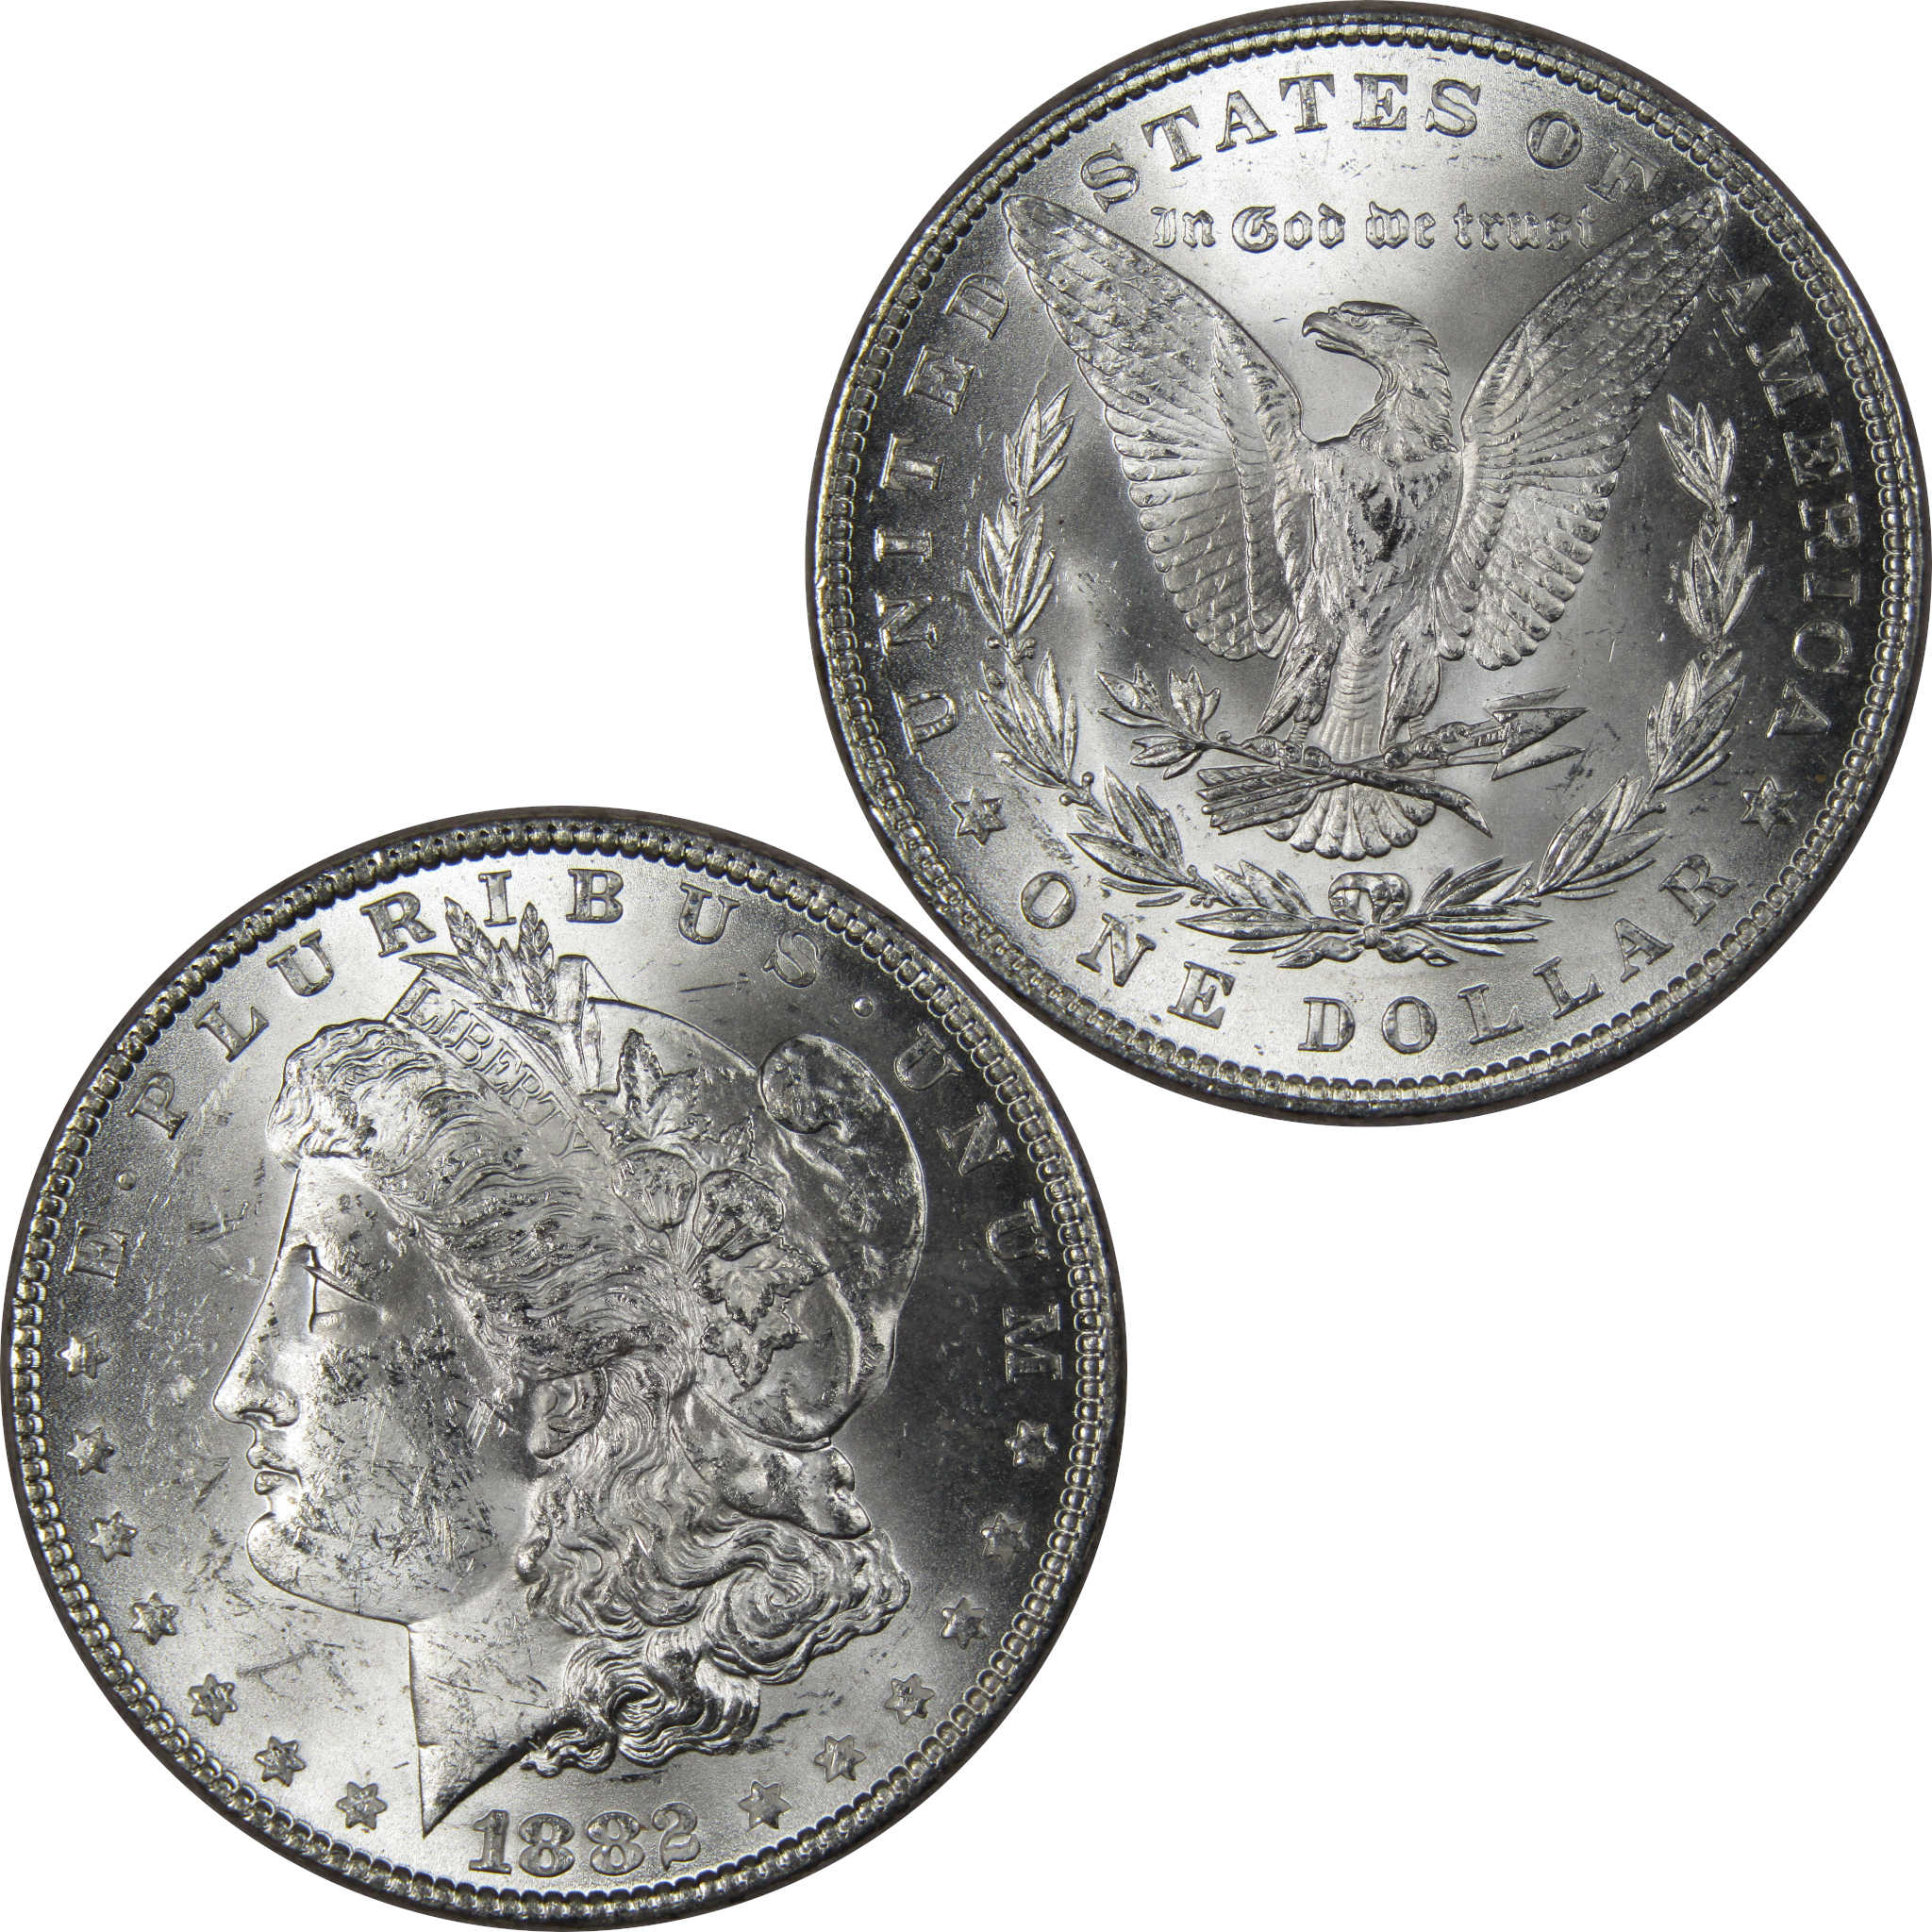 1882 Morgan Dollar BU Uncirculated Mint State 90% Silver SKU:IPC9661 - Morgan coin - Morgan silver dollar - Morgan silver dollar for sale - Profile Coins &amp; Collectibles